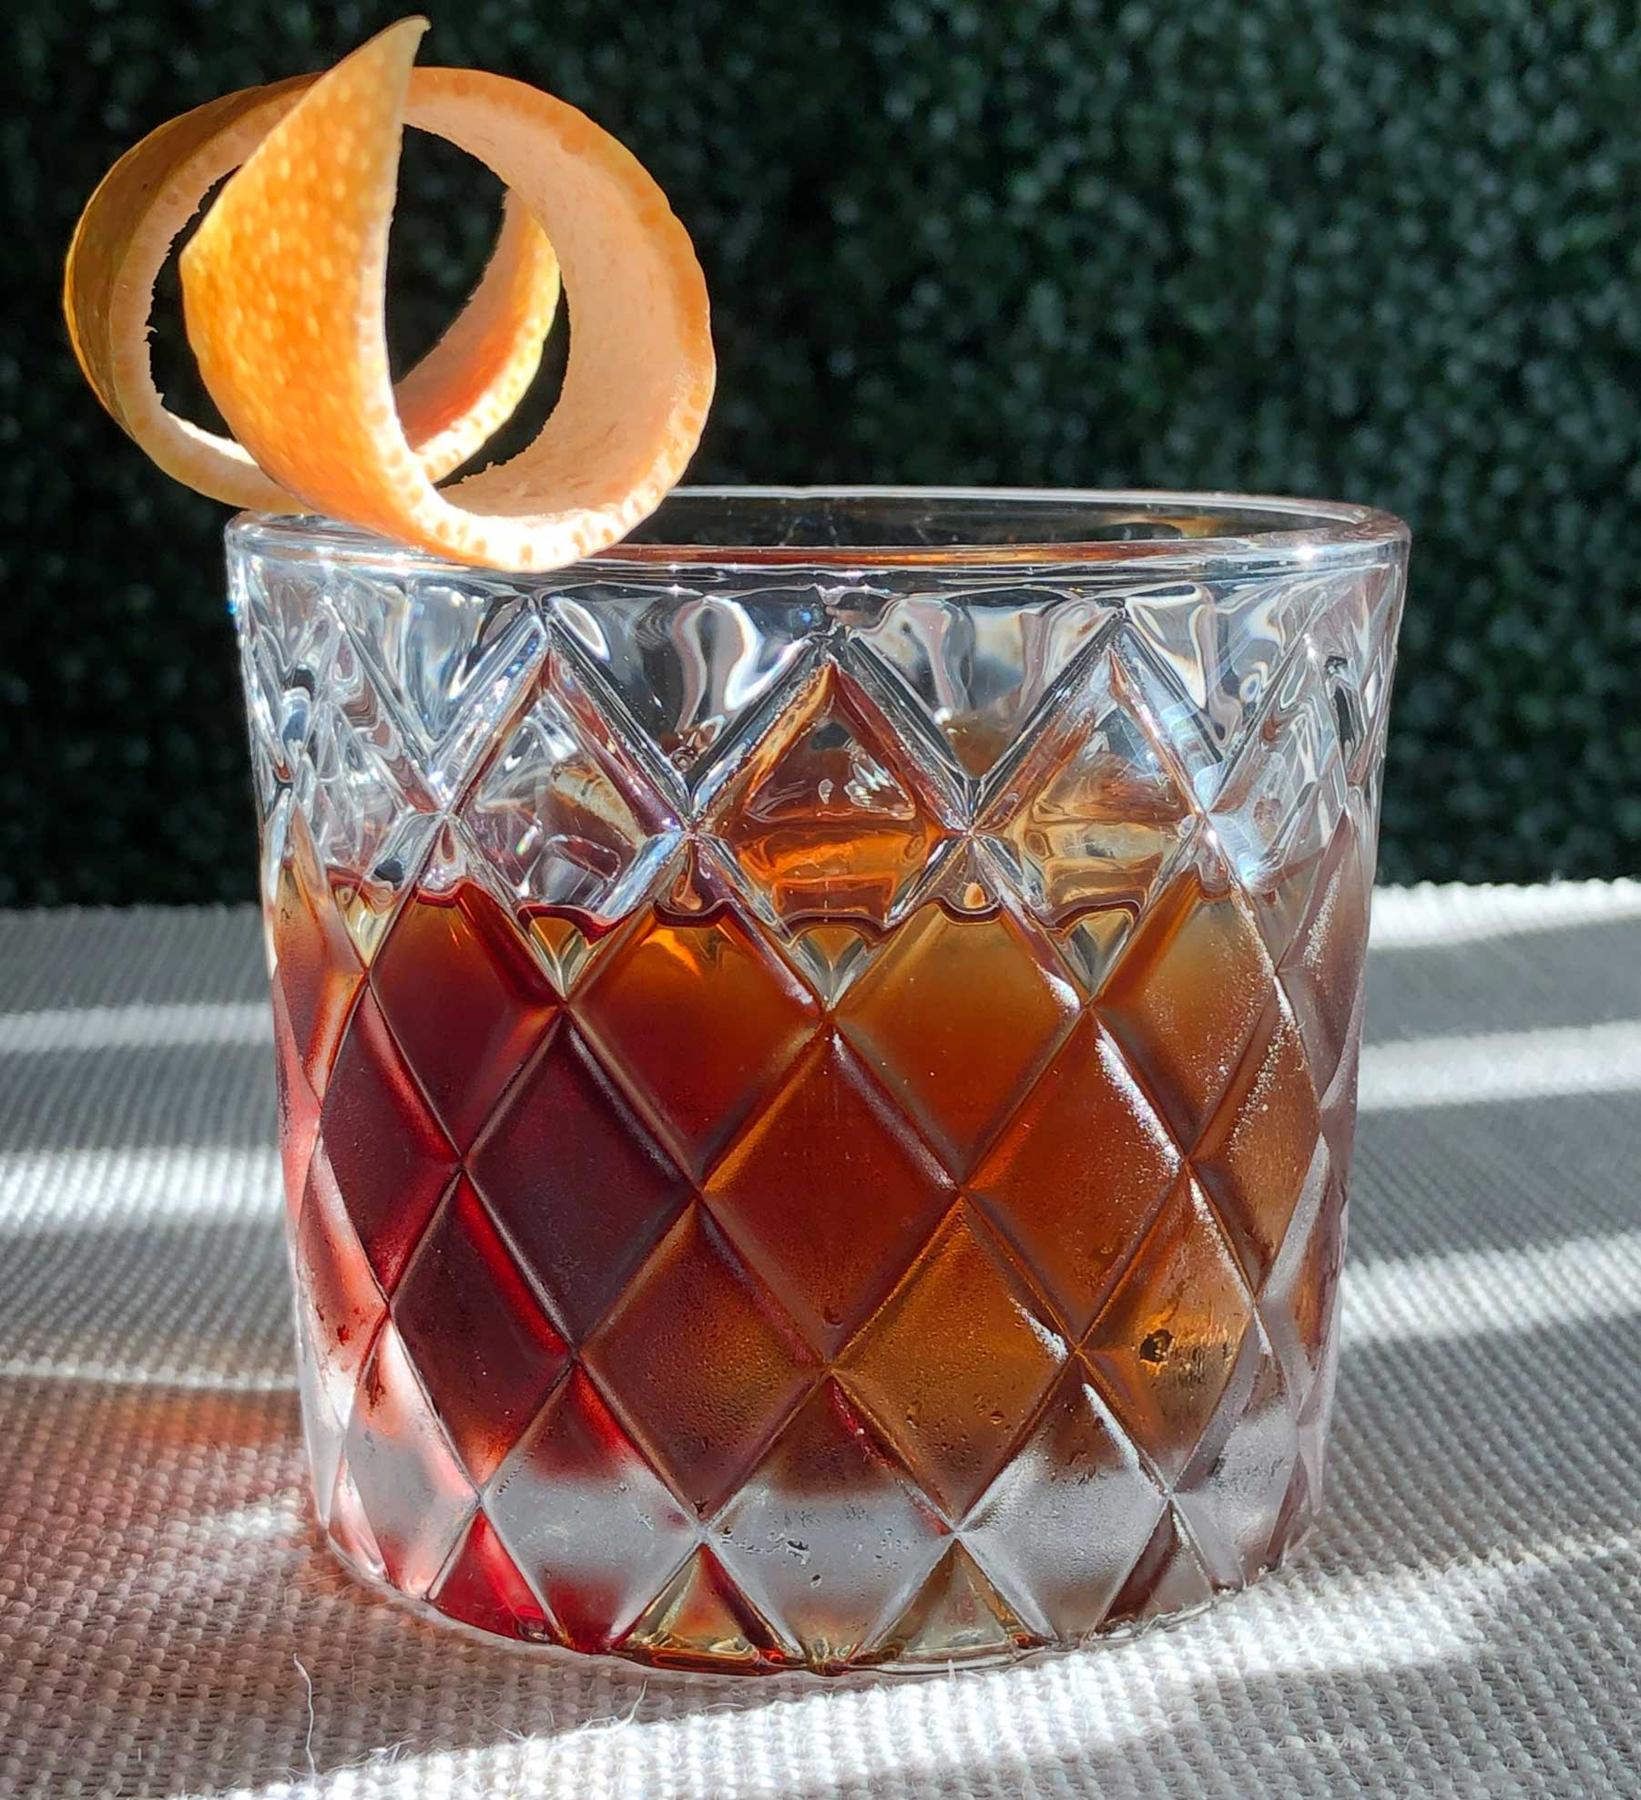 An example of the Quina-Quina, the mixed drink (drink) featuring Byrrh Grand Quinquina, Bonal Gentiane-Quina, soda water, and grapefruit twist; photo by Lee Edwards